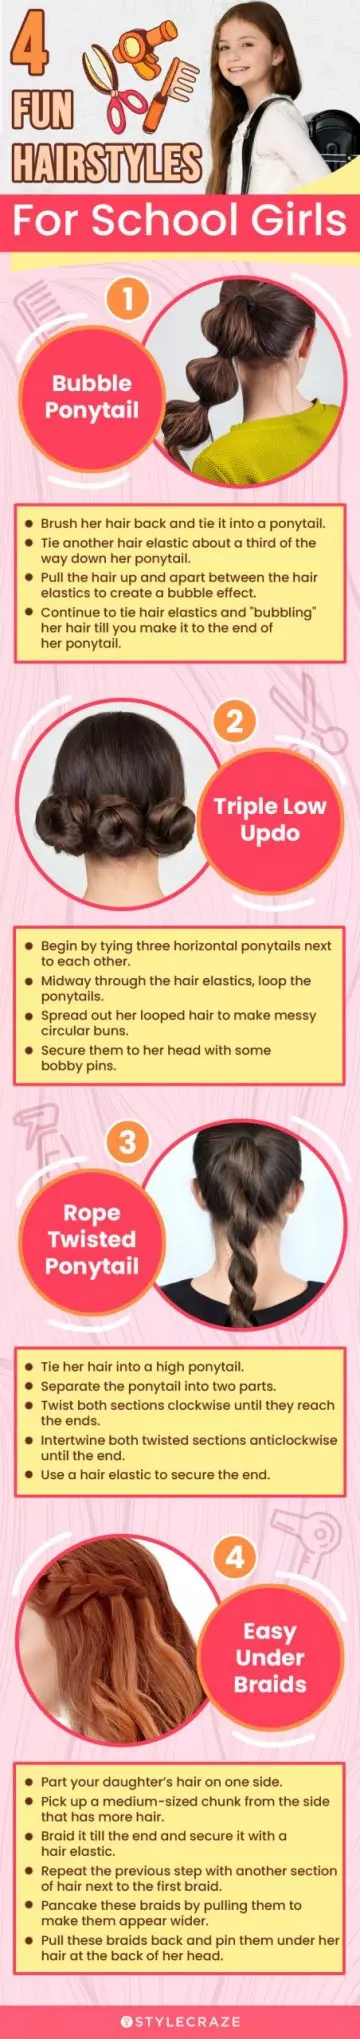 4 fun hairstyles for school girls (infographic)